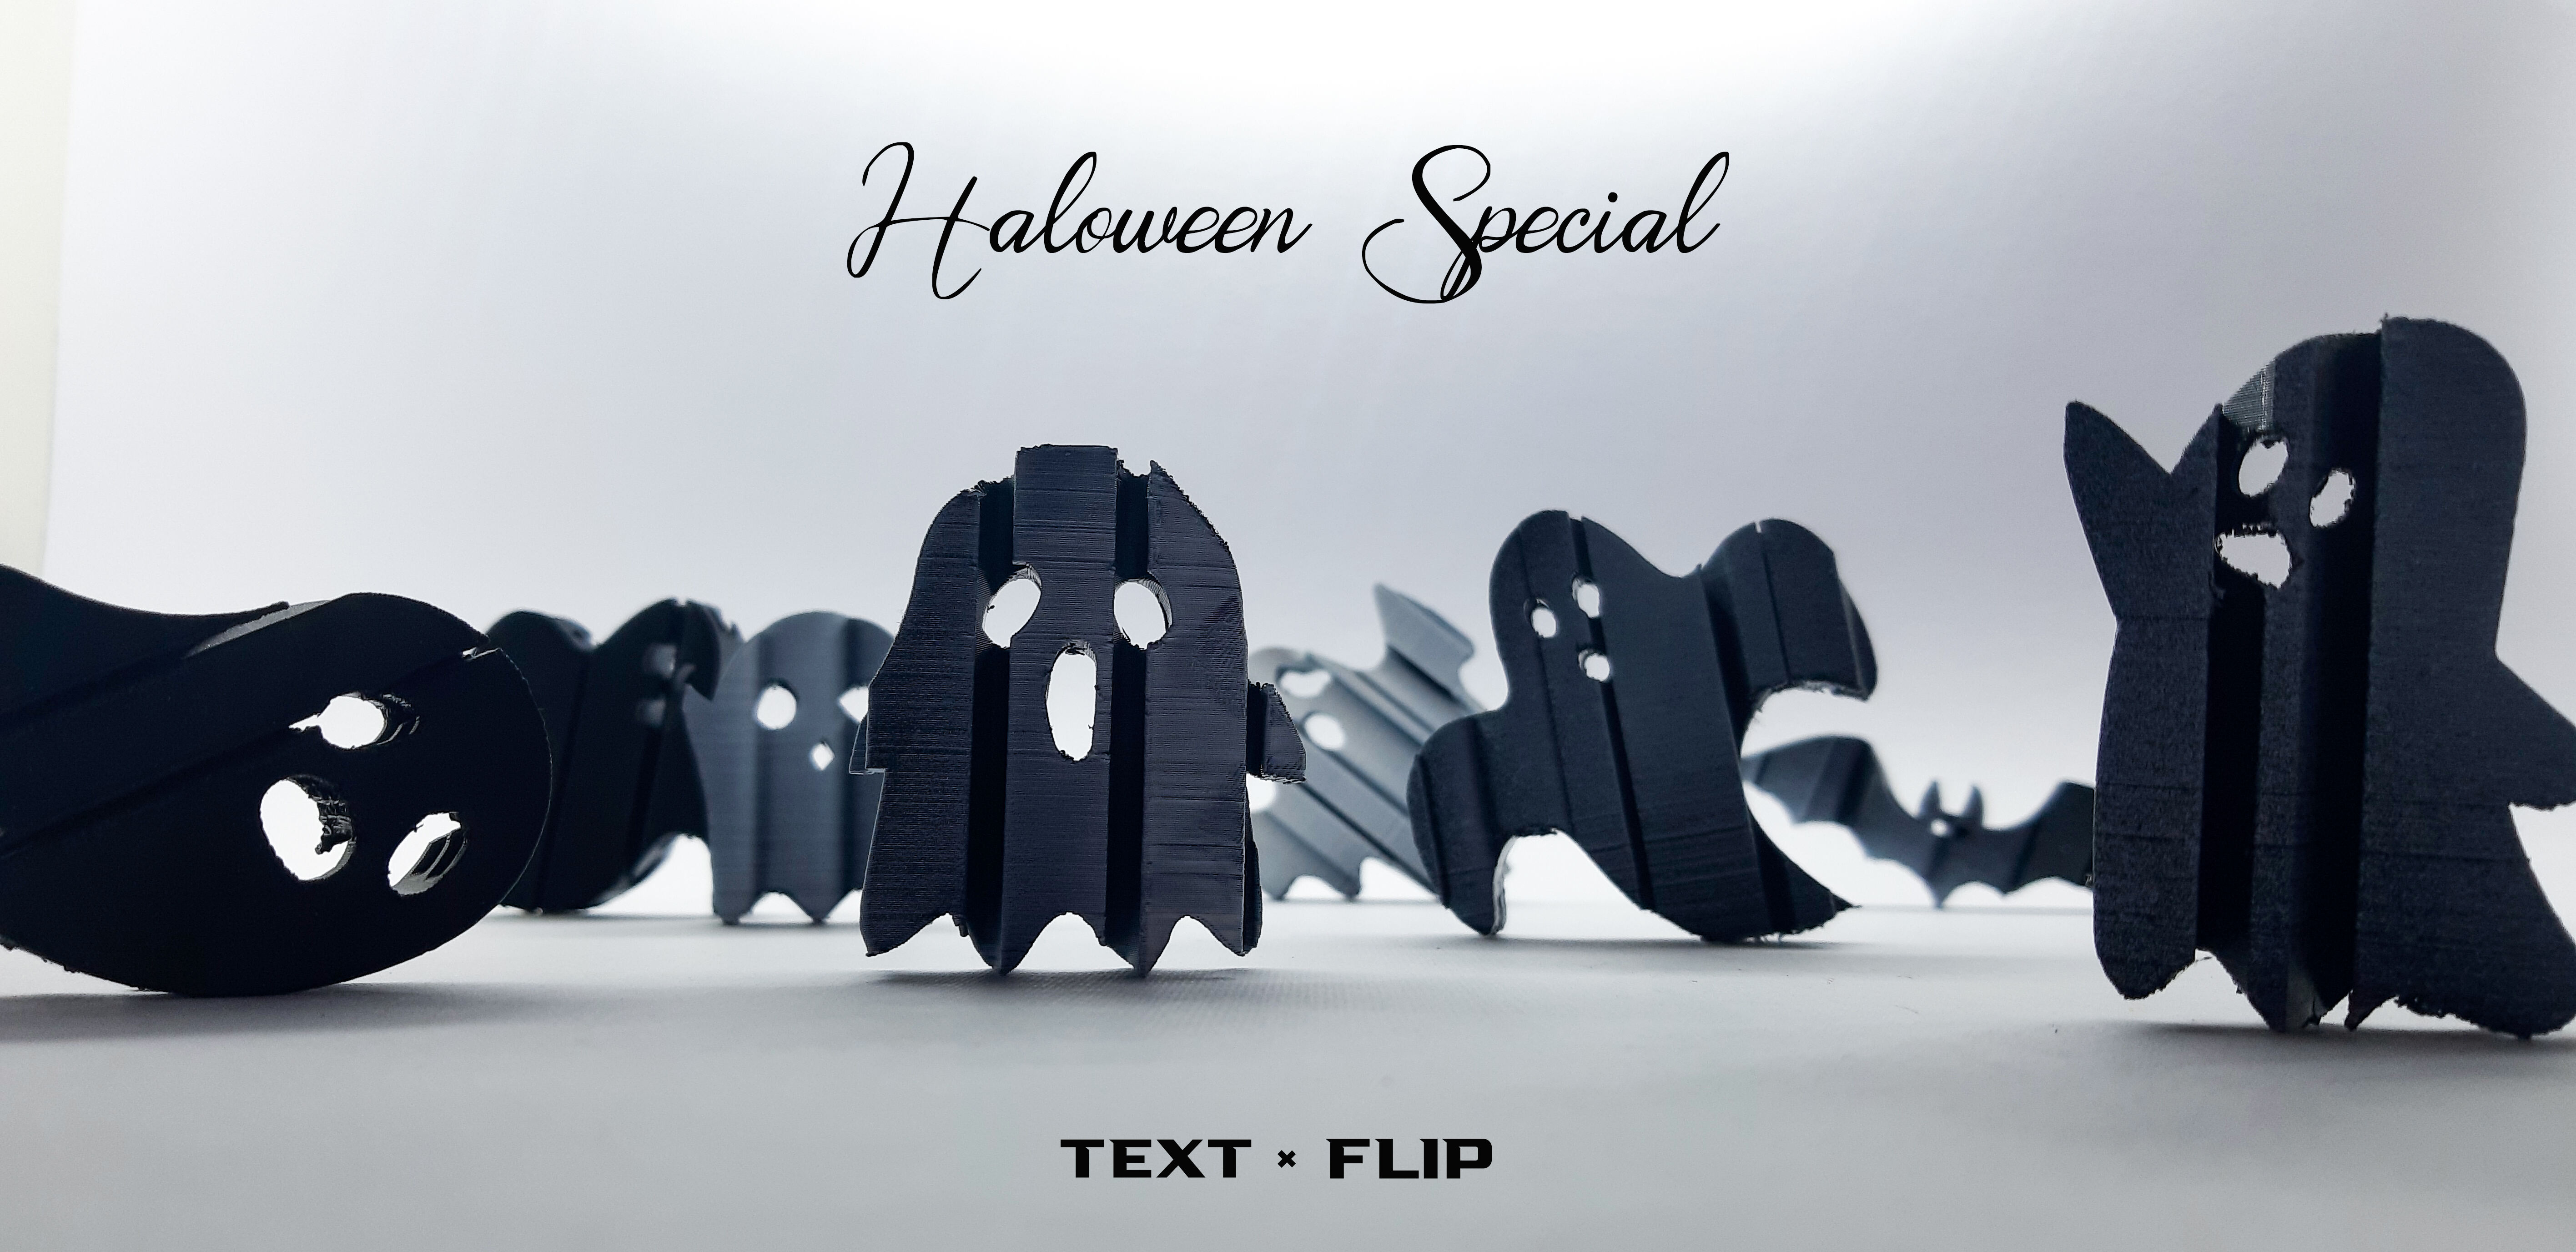 Text Flip: Boo - Ghost